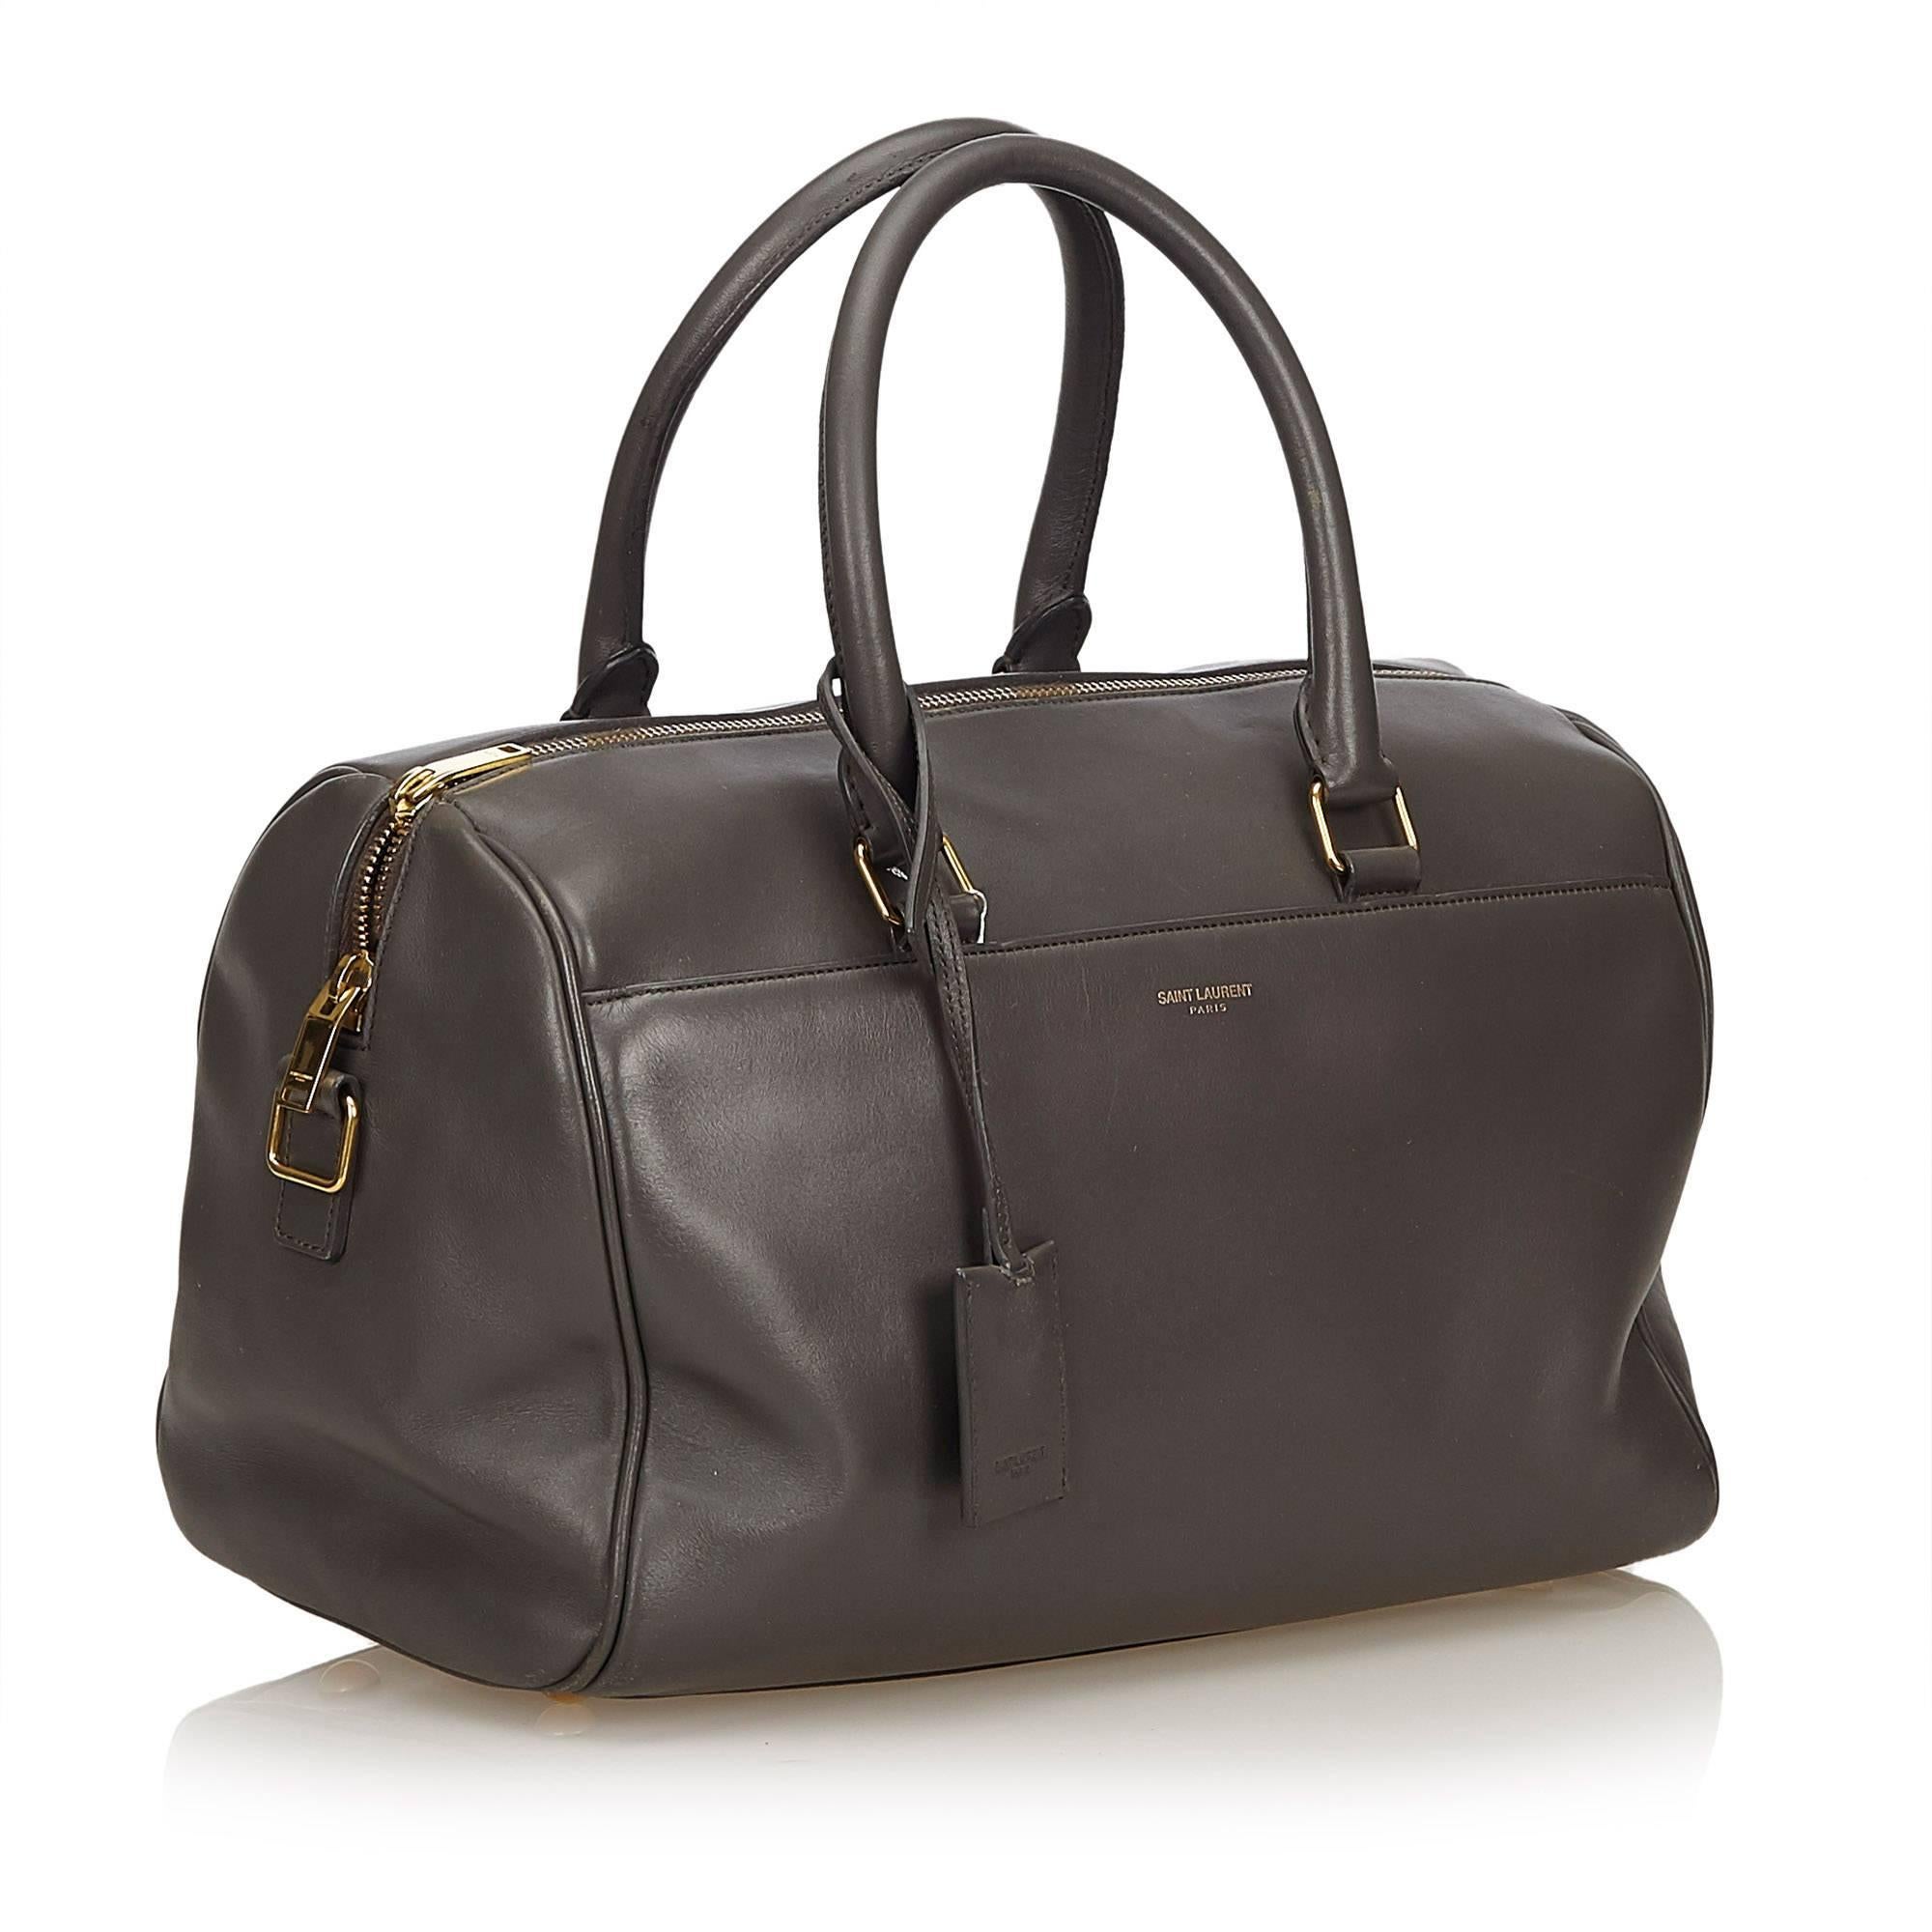 The Classic Duffle Bag features a leather body, rolled leather handles, top zip closure, and interior zip pocket. 

It carries an AB condition rating.

Dimensions: 
Length 20 cm
Width 30 cm
Depth 17 cm
Shoulder Drop 45 cm

Inclusions: Shoulder